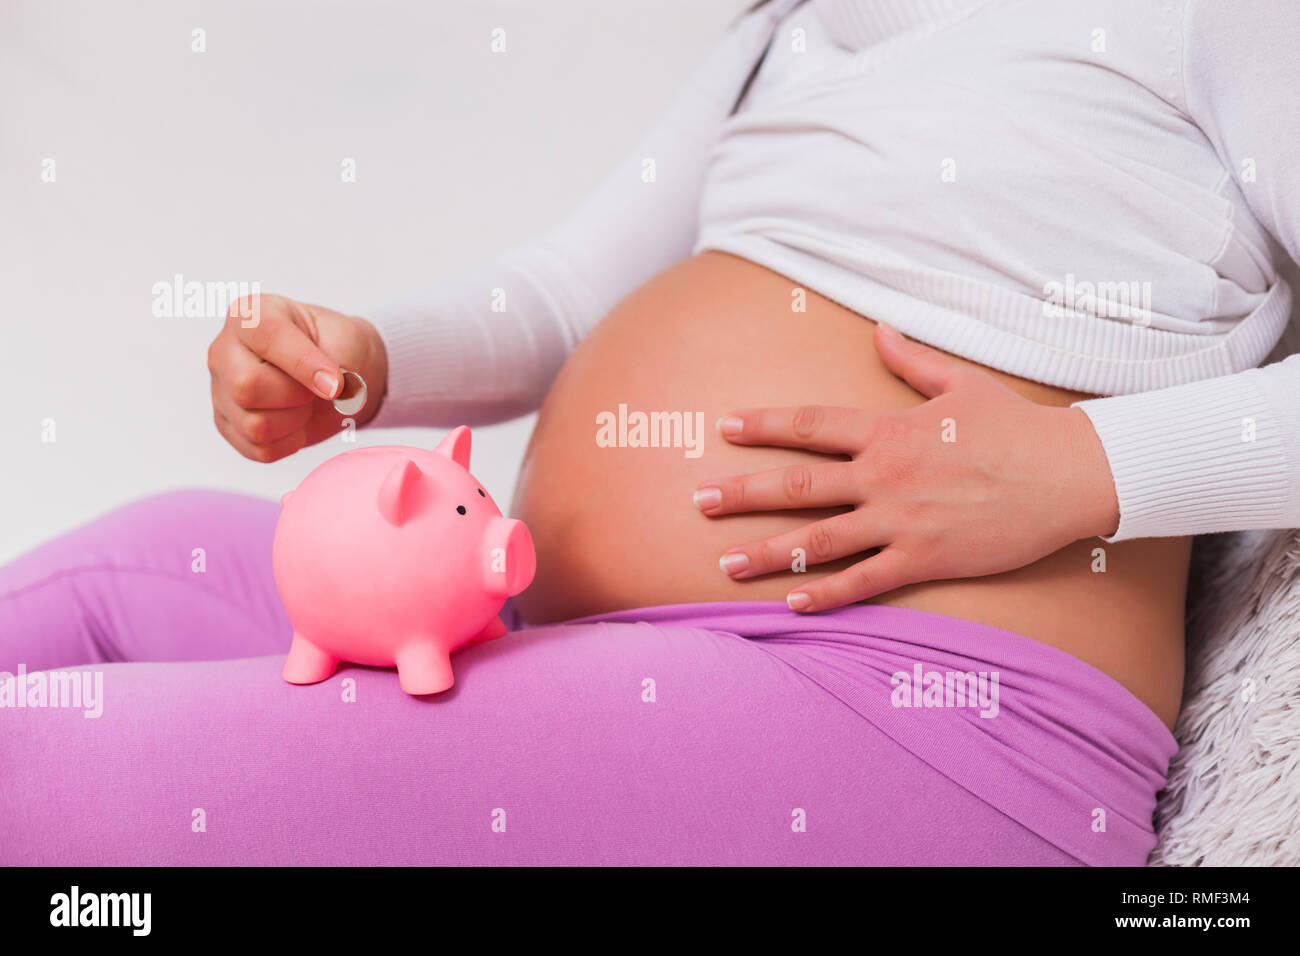 Pregnant woman saving money for her child. Stock Photo